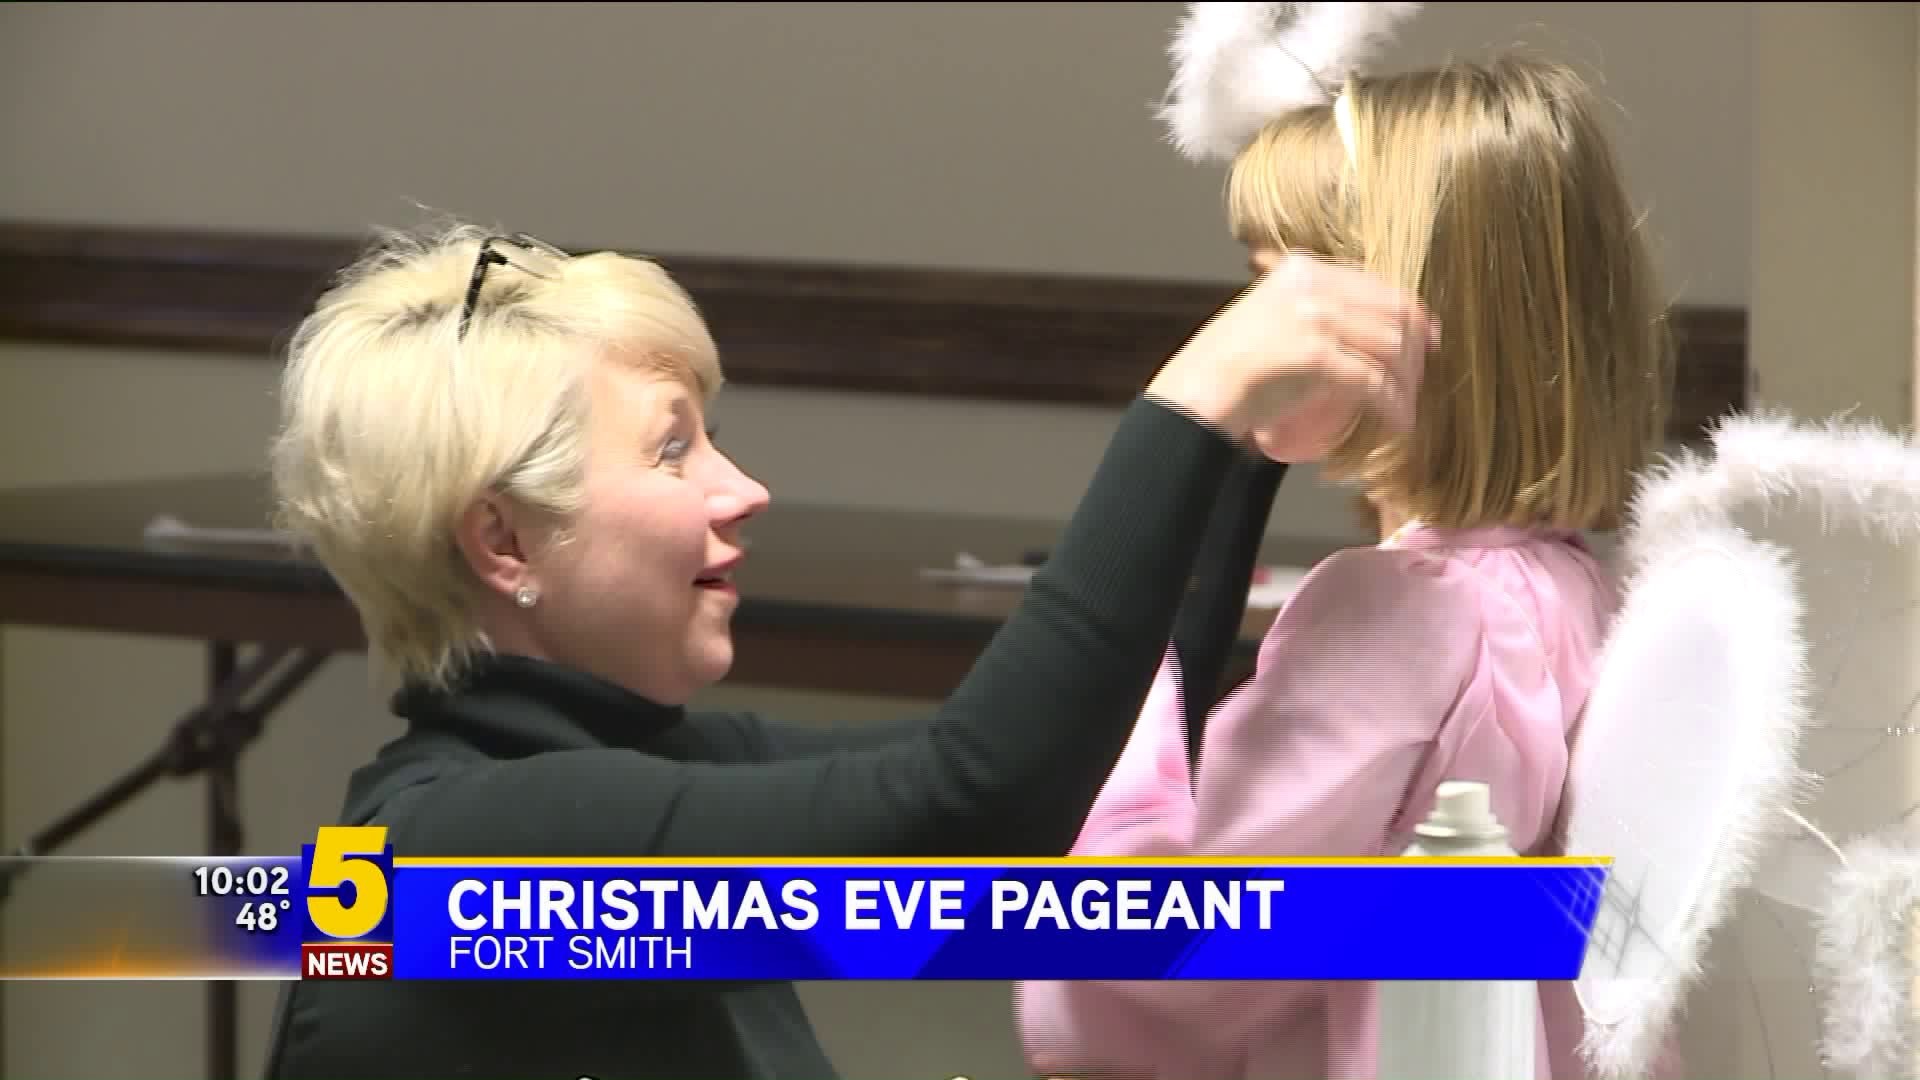 Christmas Eve Pageant In Fort Smith